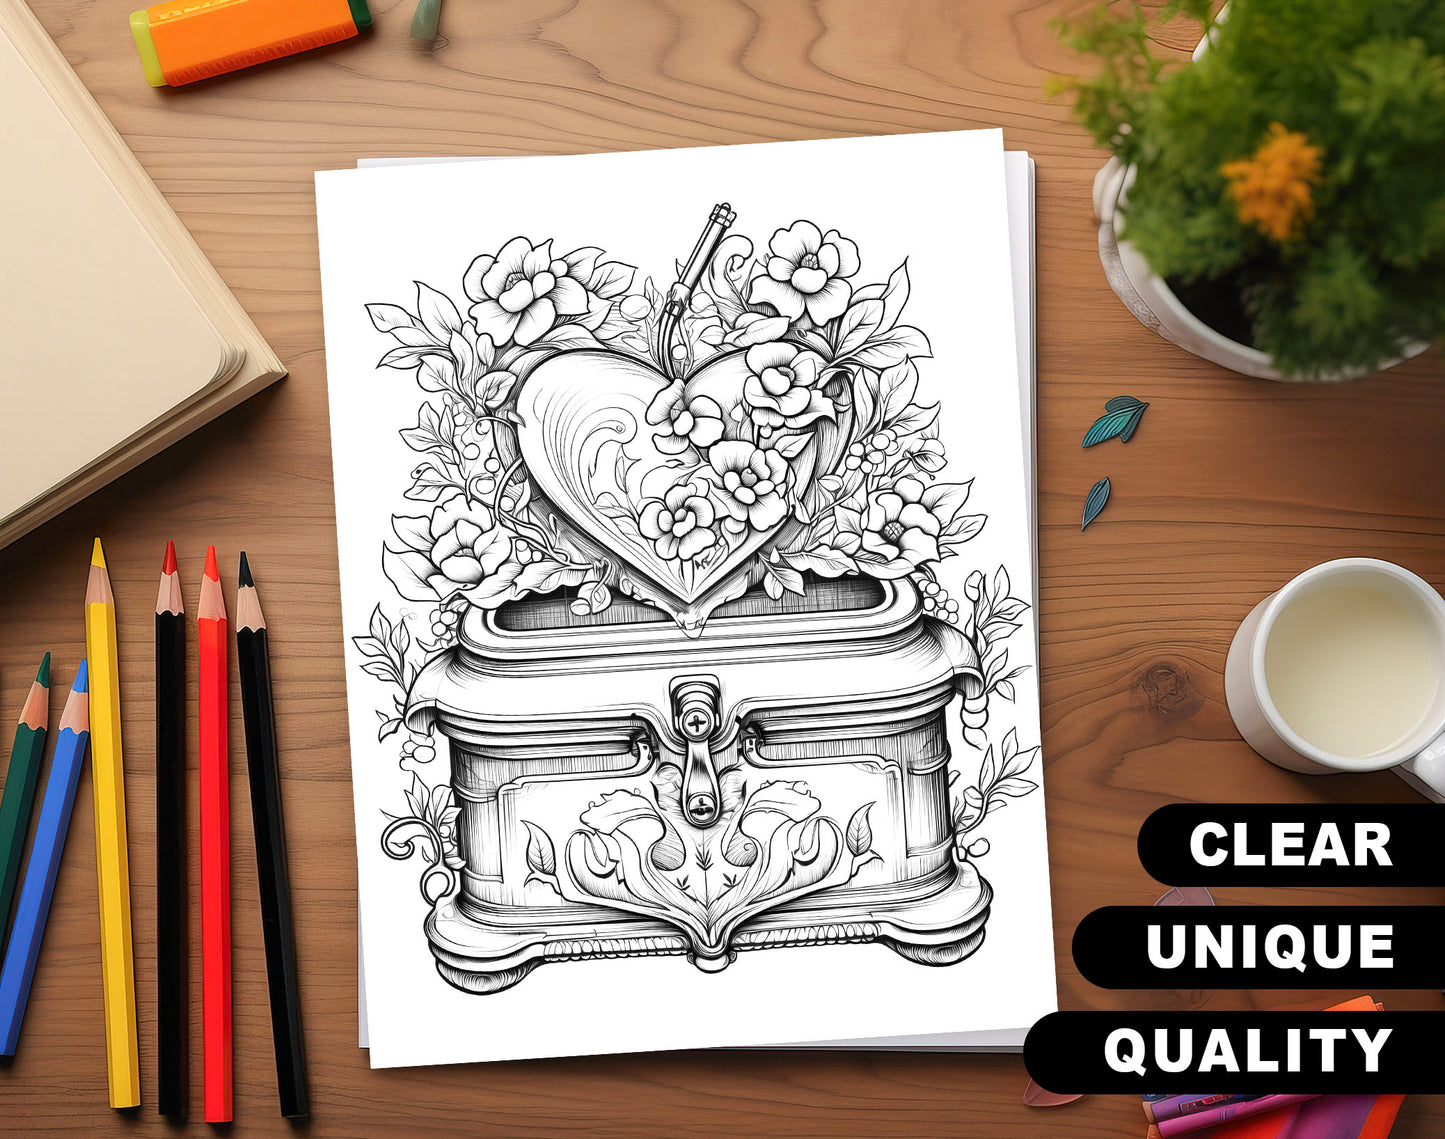 50 Music Box Grayscale Coloring Pages - Instant Download - Printable Dark/Light